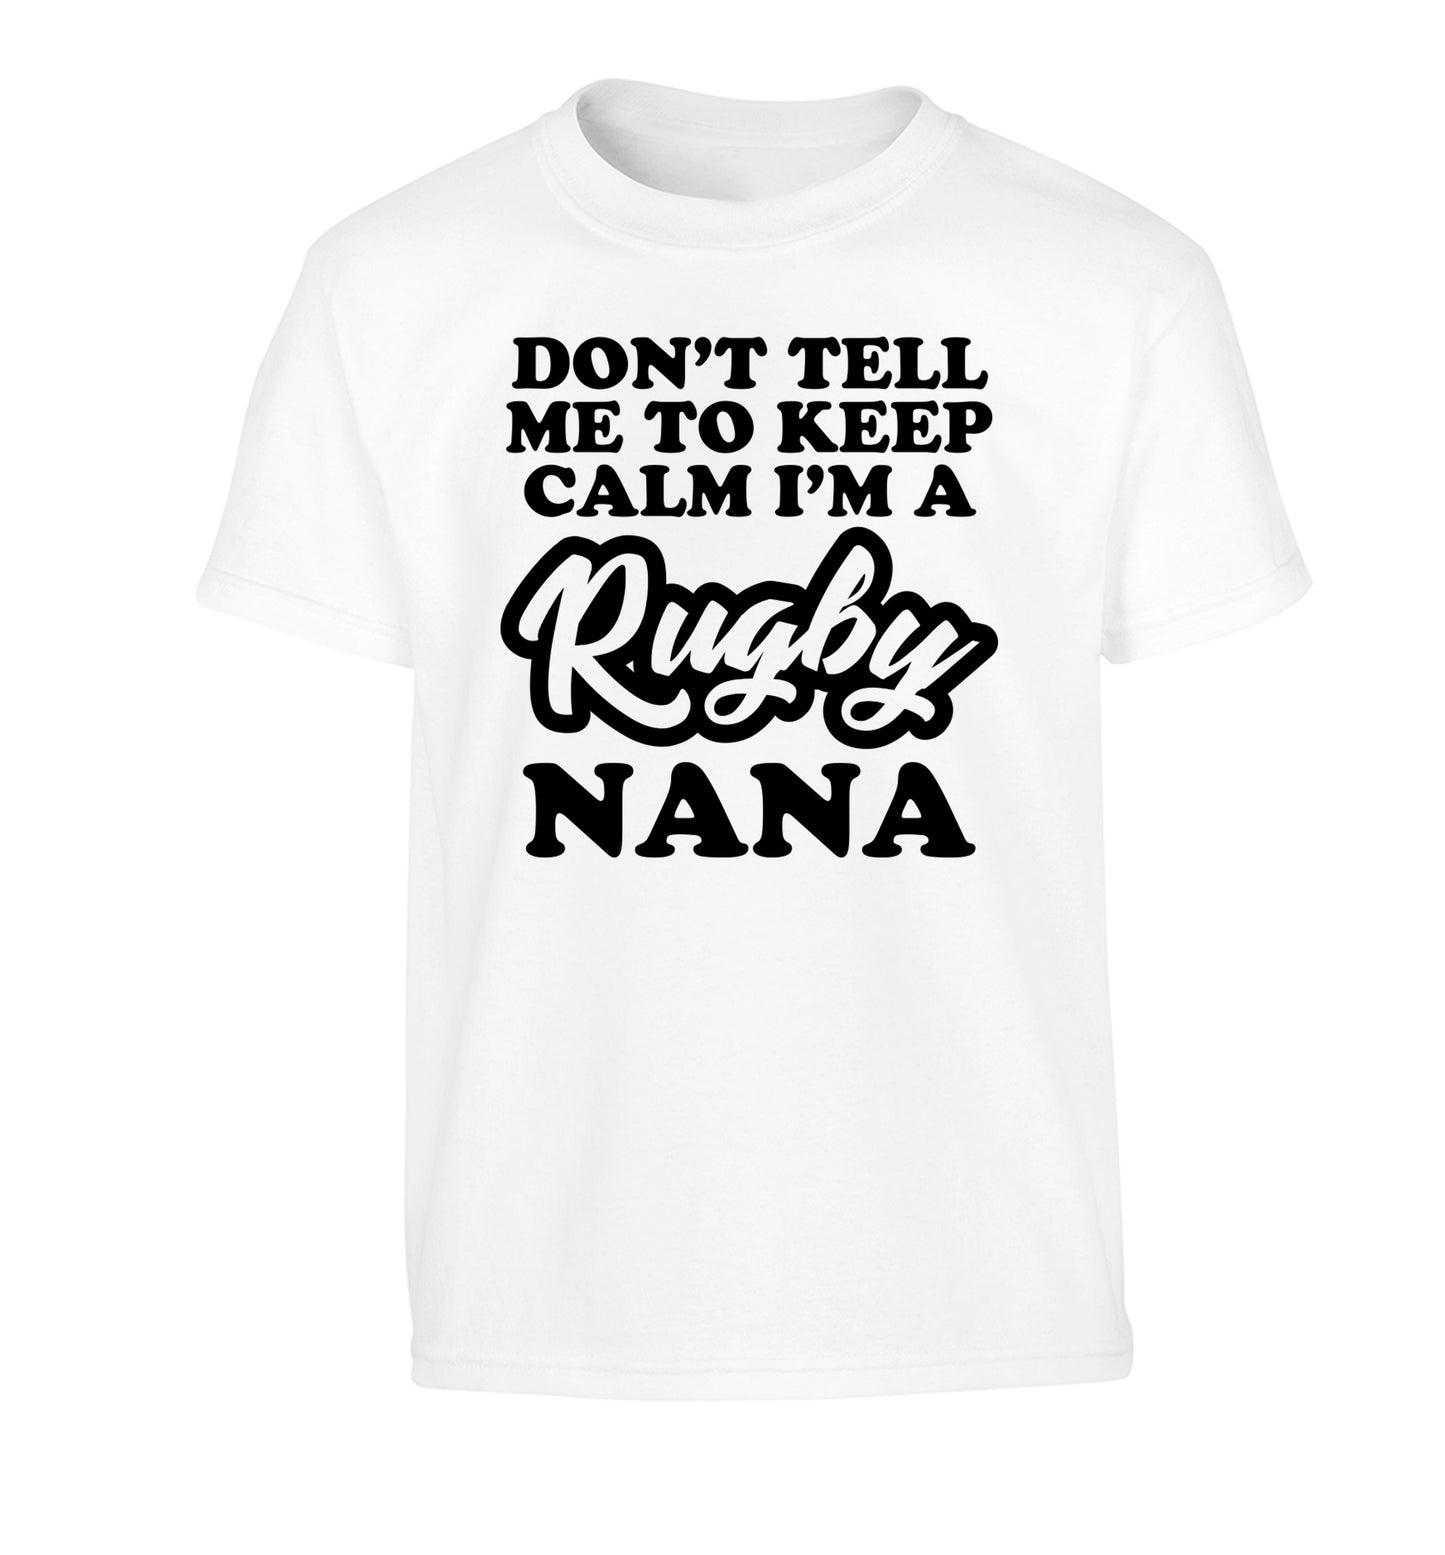 Don't tell me to keep calm I'm a rugby nana Children's white Tshirt 12-13 Years